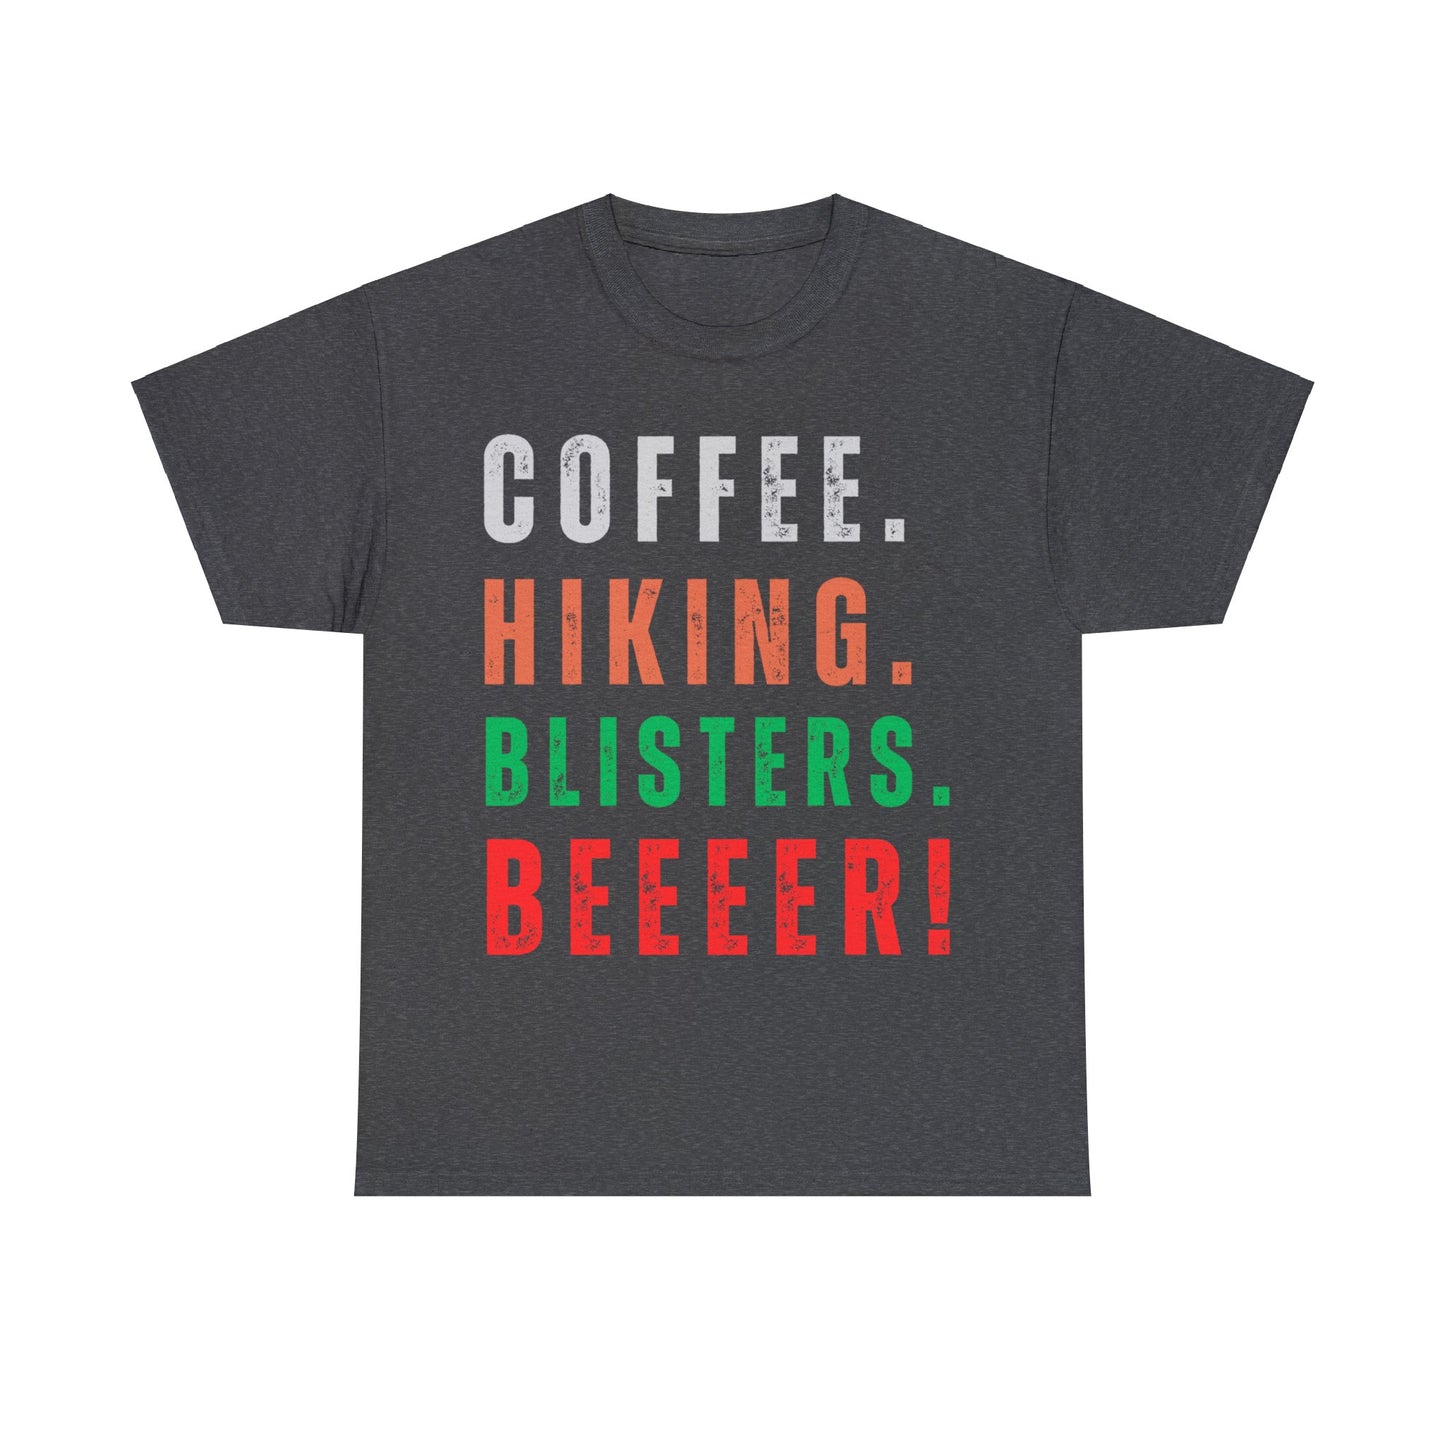 COFFEE. HIKING. BLISTERS. BEEEER T-Shirt - NOT SOLD IN STORES - Hiker, Trekker, Adventurer, Hiking, Trekking, Adventure Lover Express Delivery available